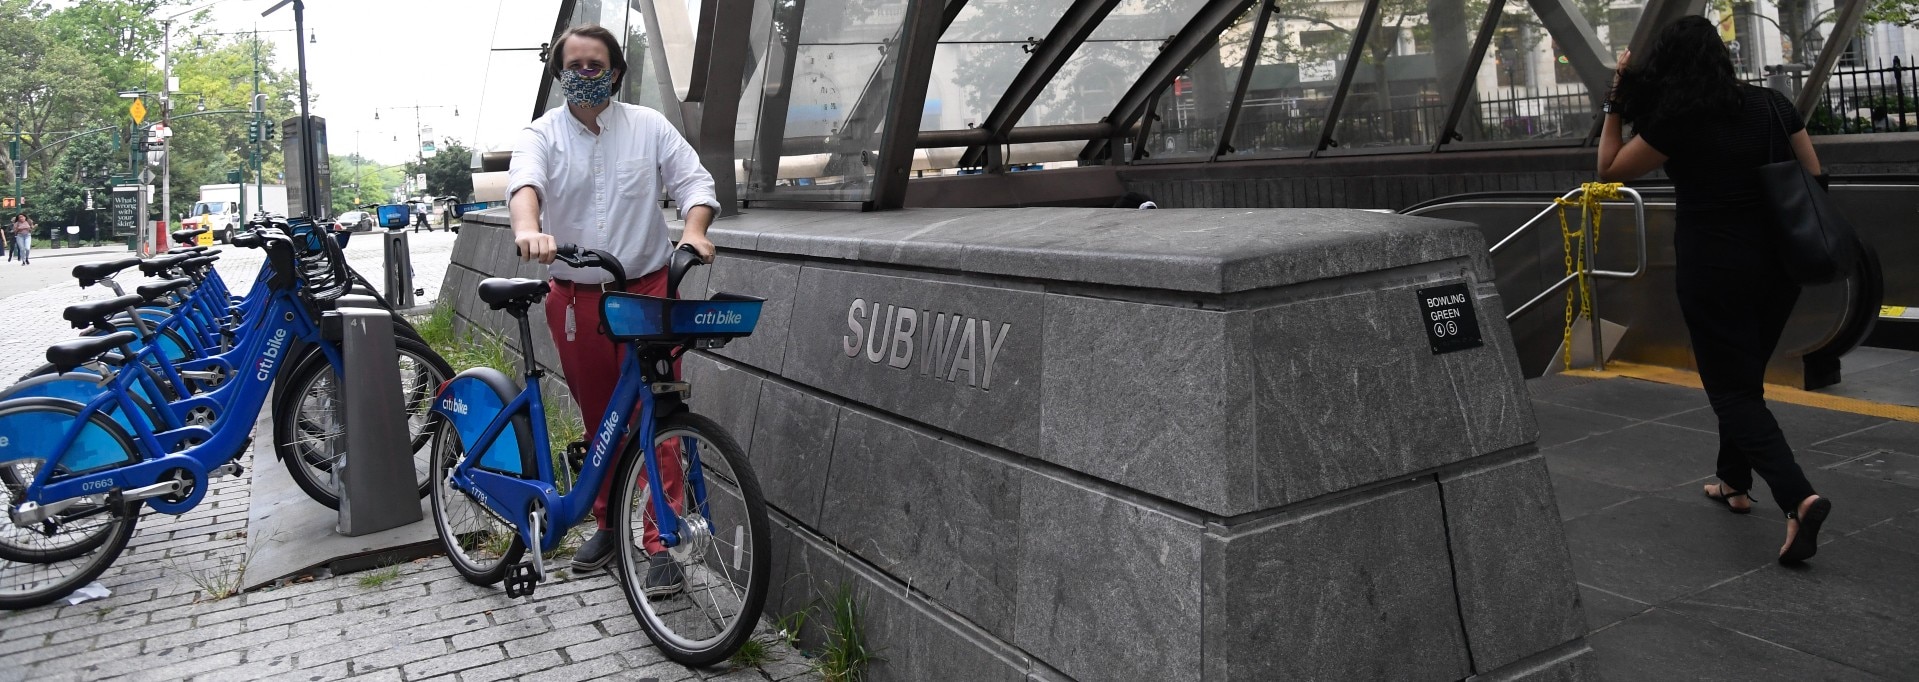 A large blue bike being wheeled by a man wearing red pants. He is next to a subway station entrance. 